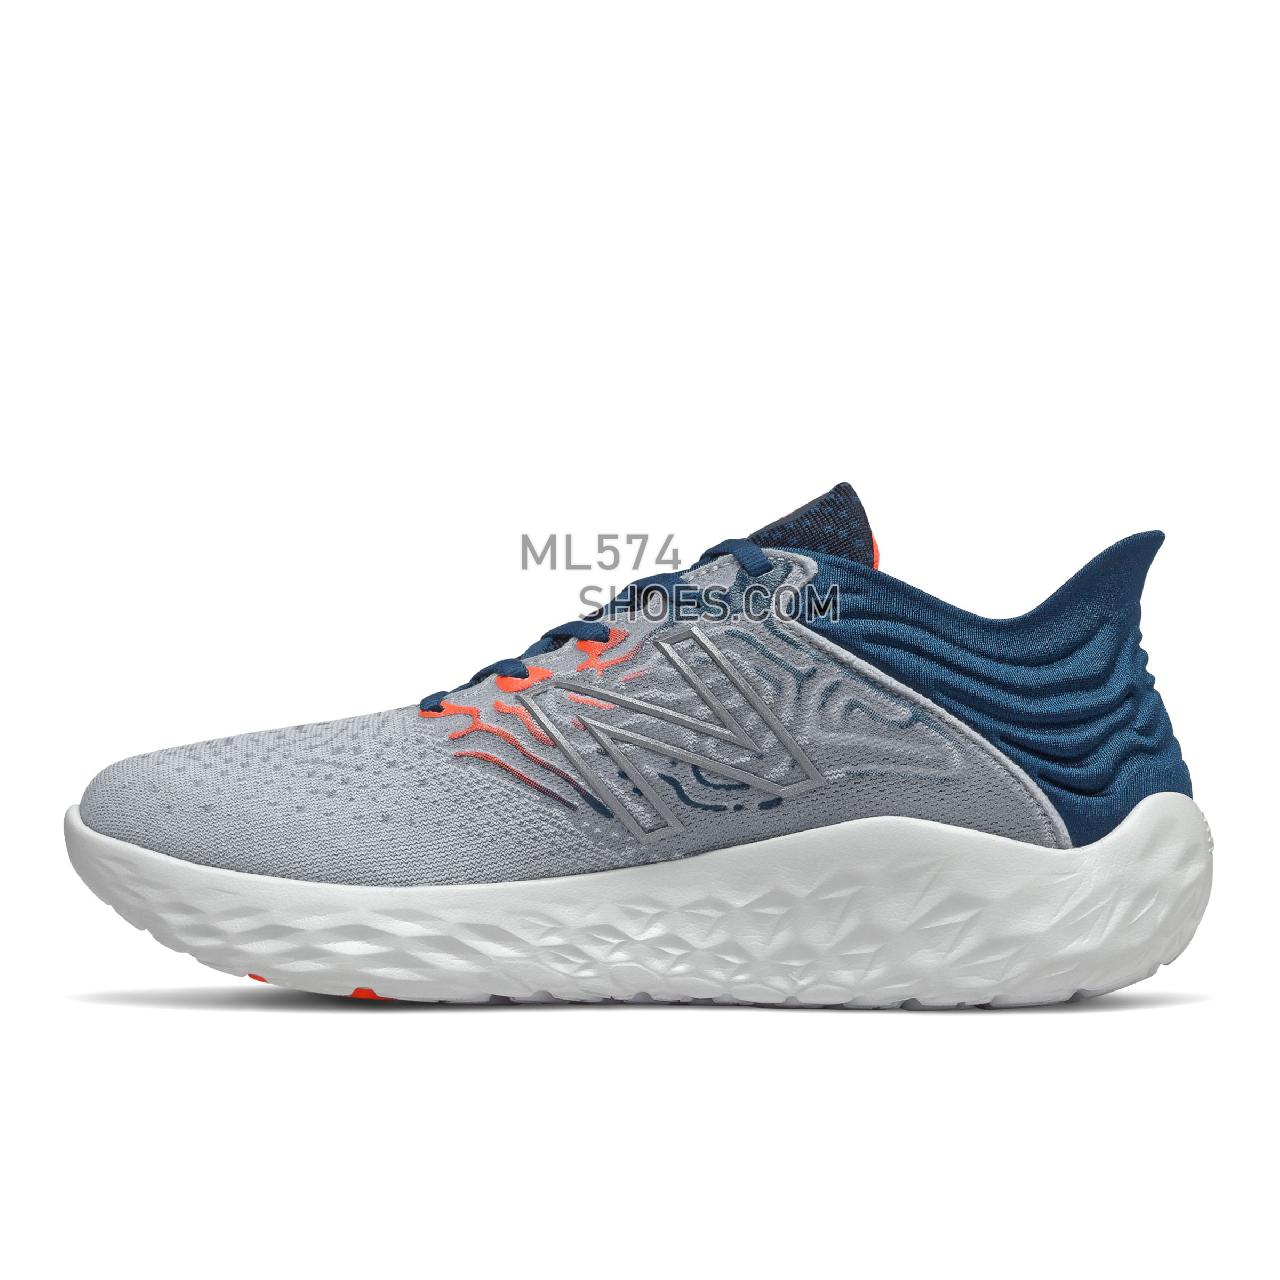 New Balance Fresh Foam Beacon v3 - Men's Neutral Running - Light Cyclone with Rogue Wave and Dynomite - MBECNGB3